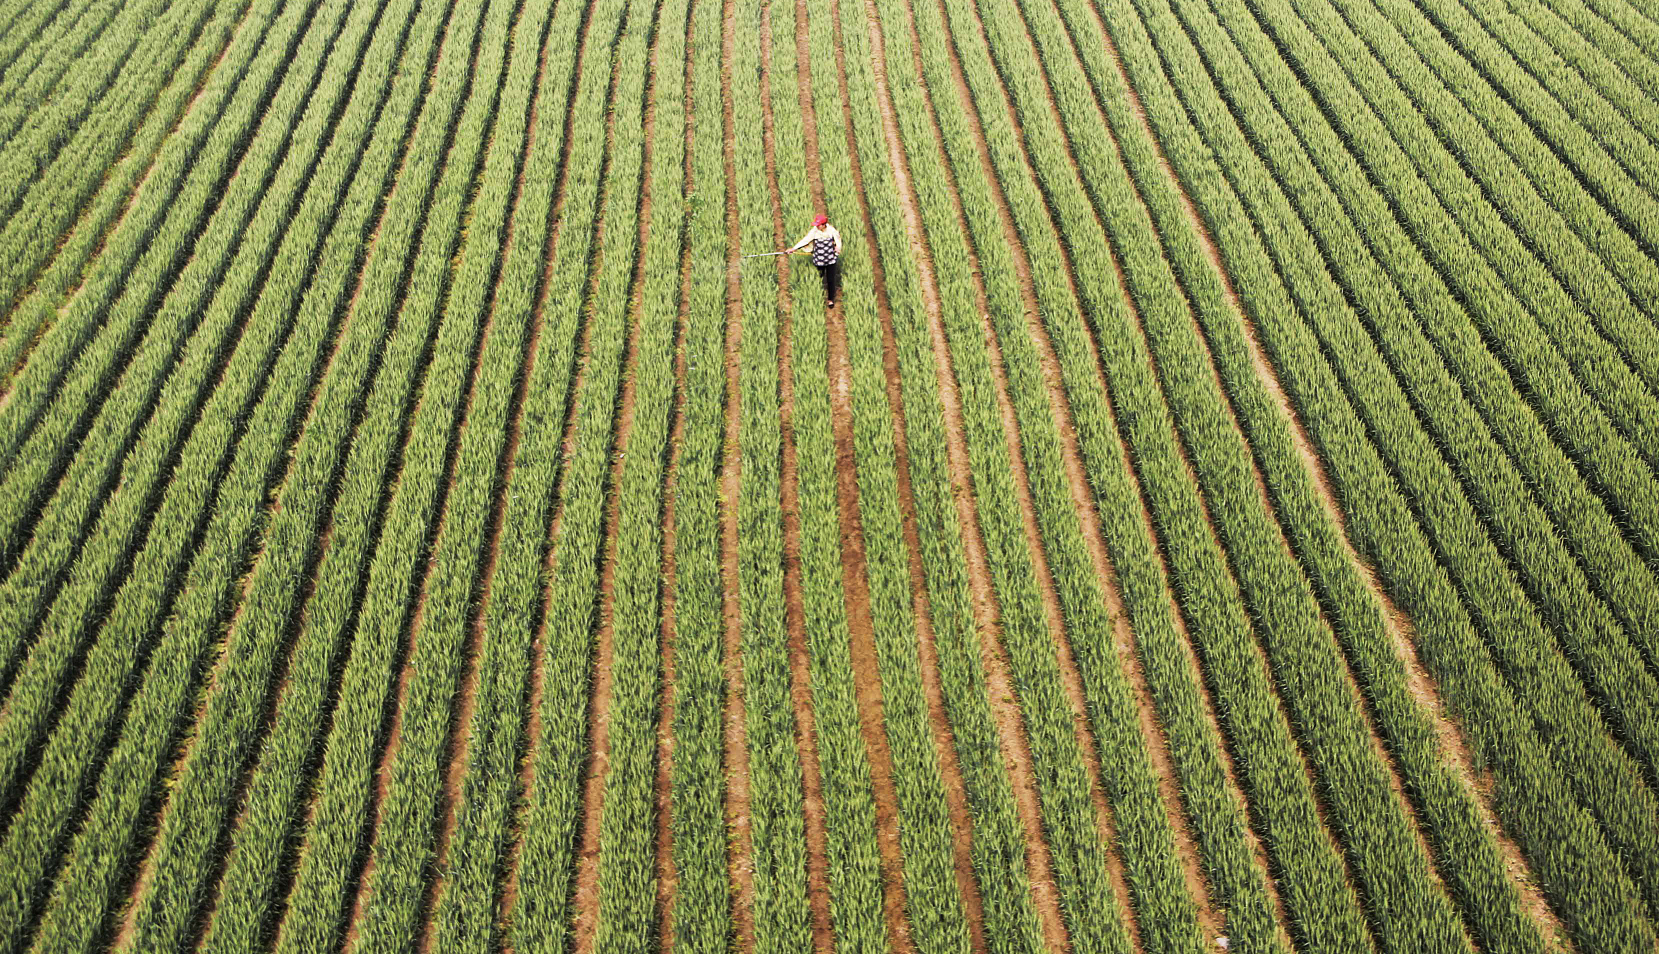 Sinofert said the outlook for the fertiliser sector is clouded by slowing demand growth and a supply glut. Photo: Xinhua